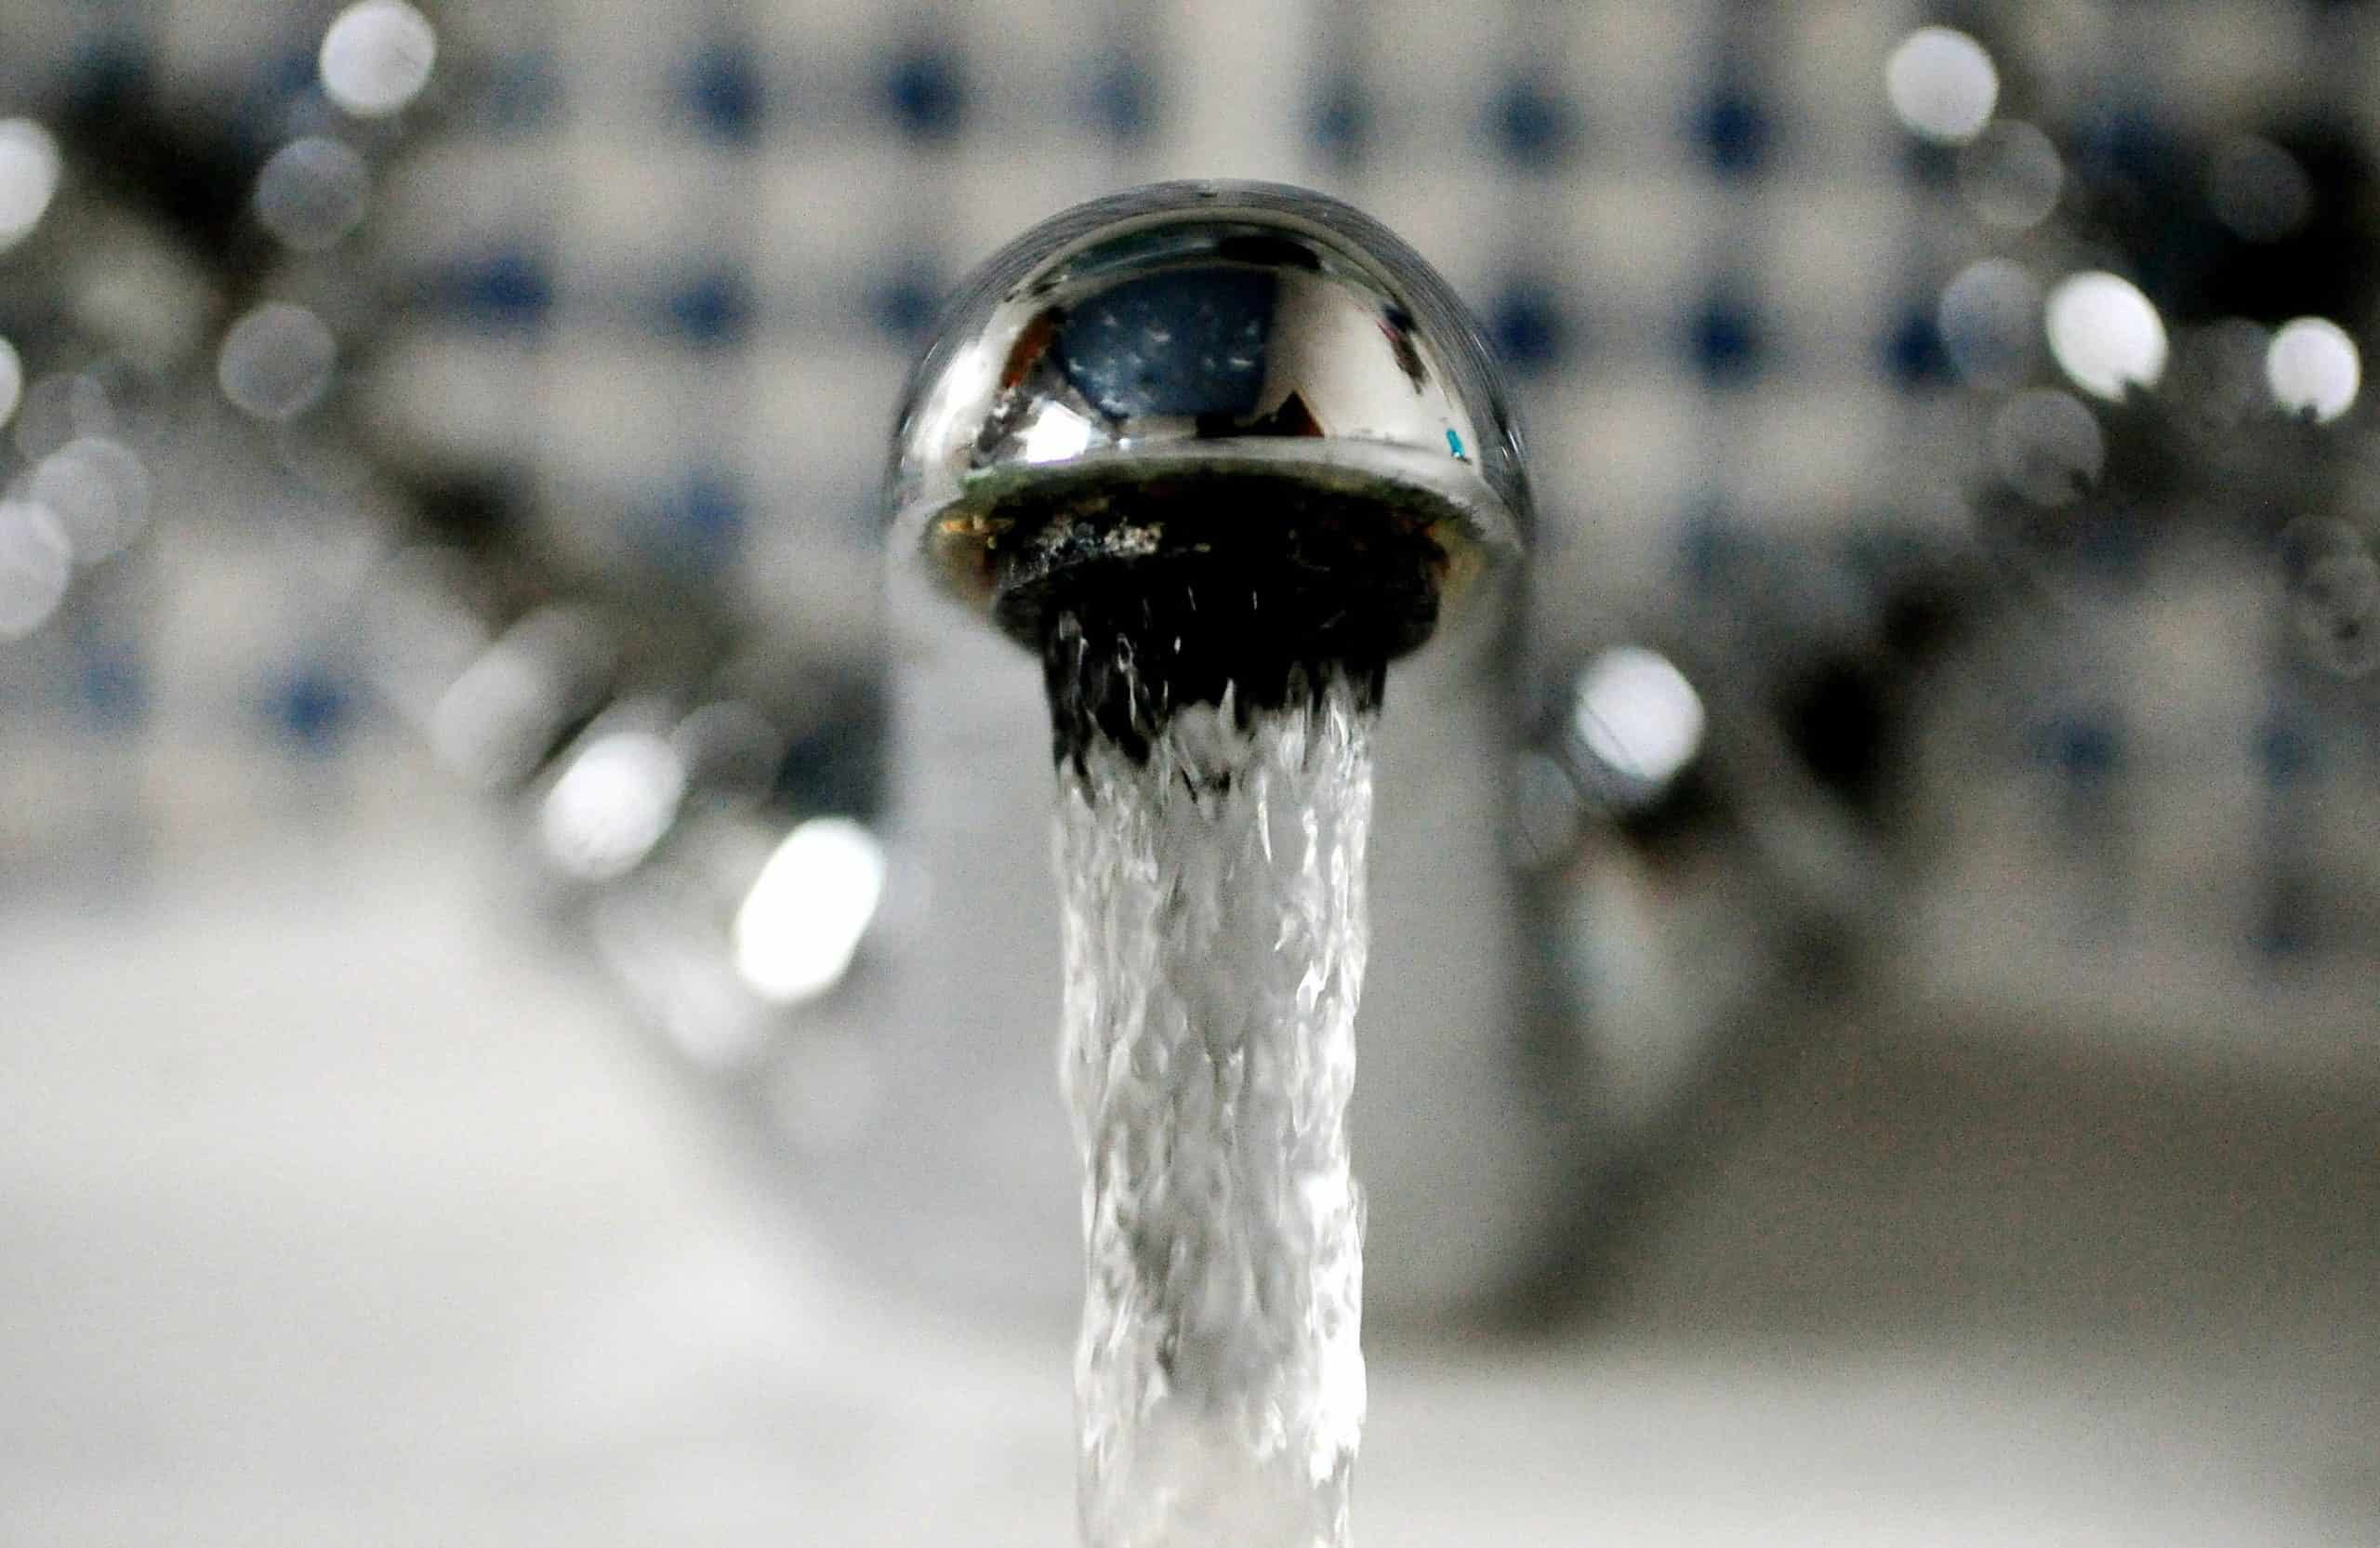 Huge levels of toxic chemicals found in drinking water in Cambridgeshire